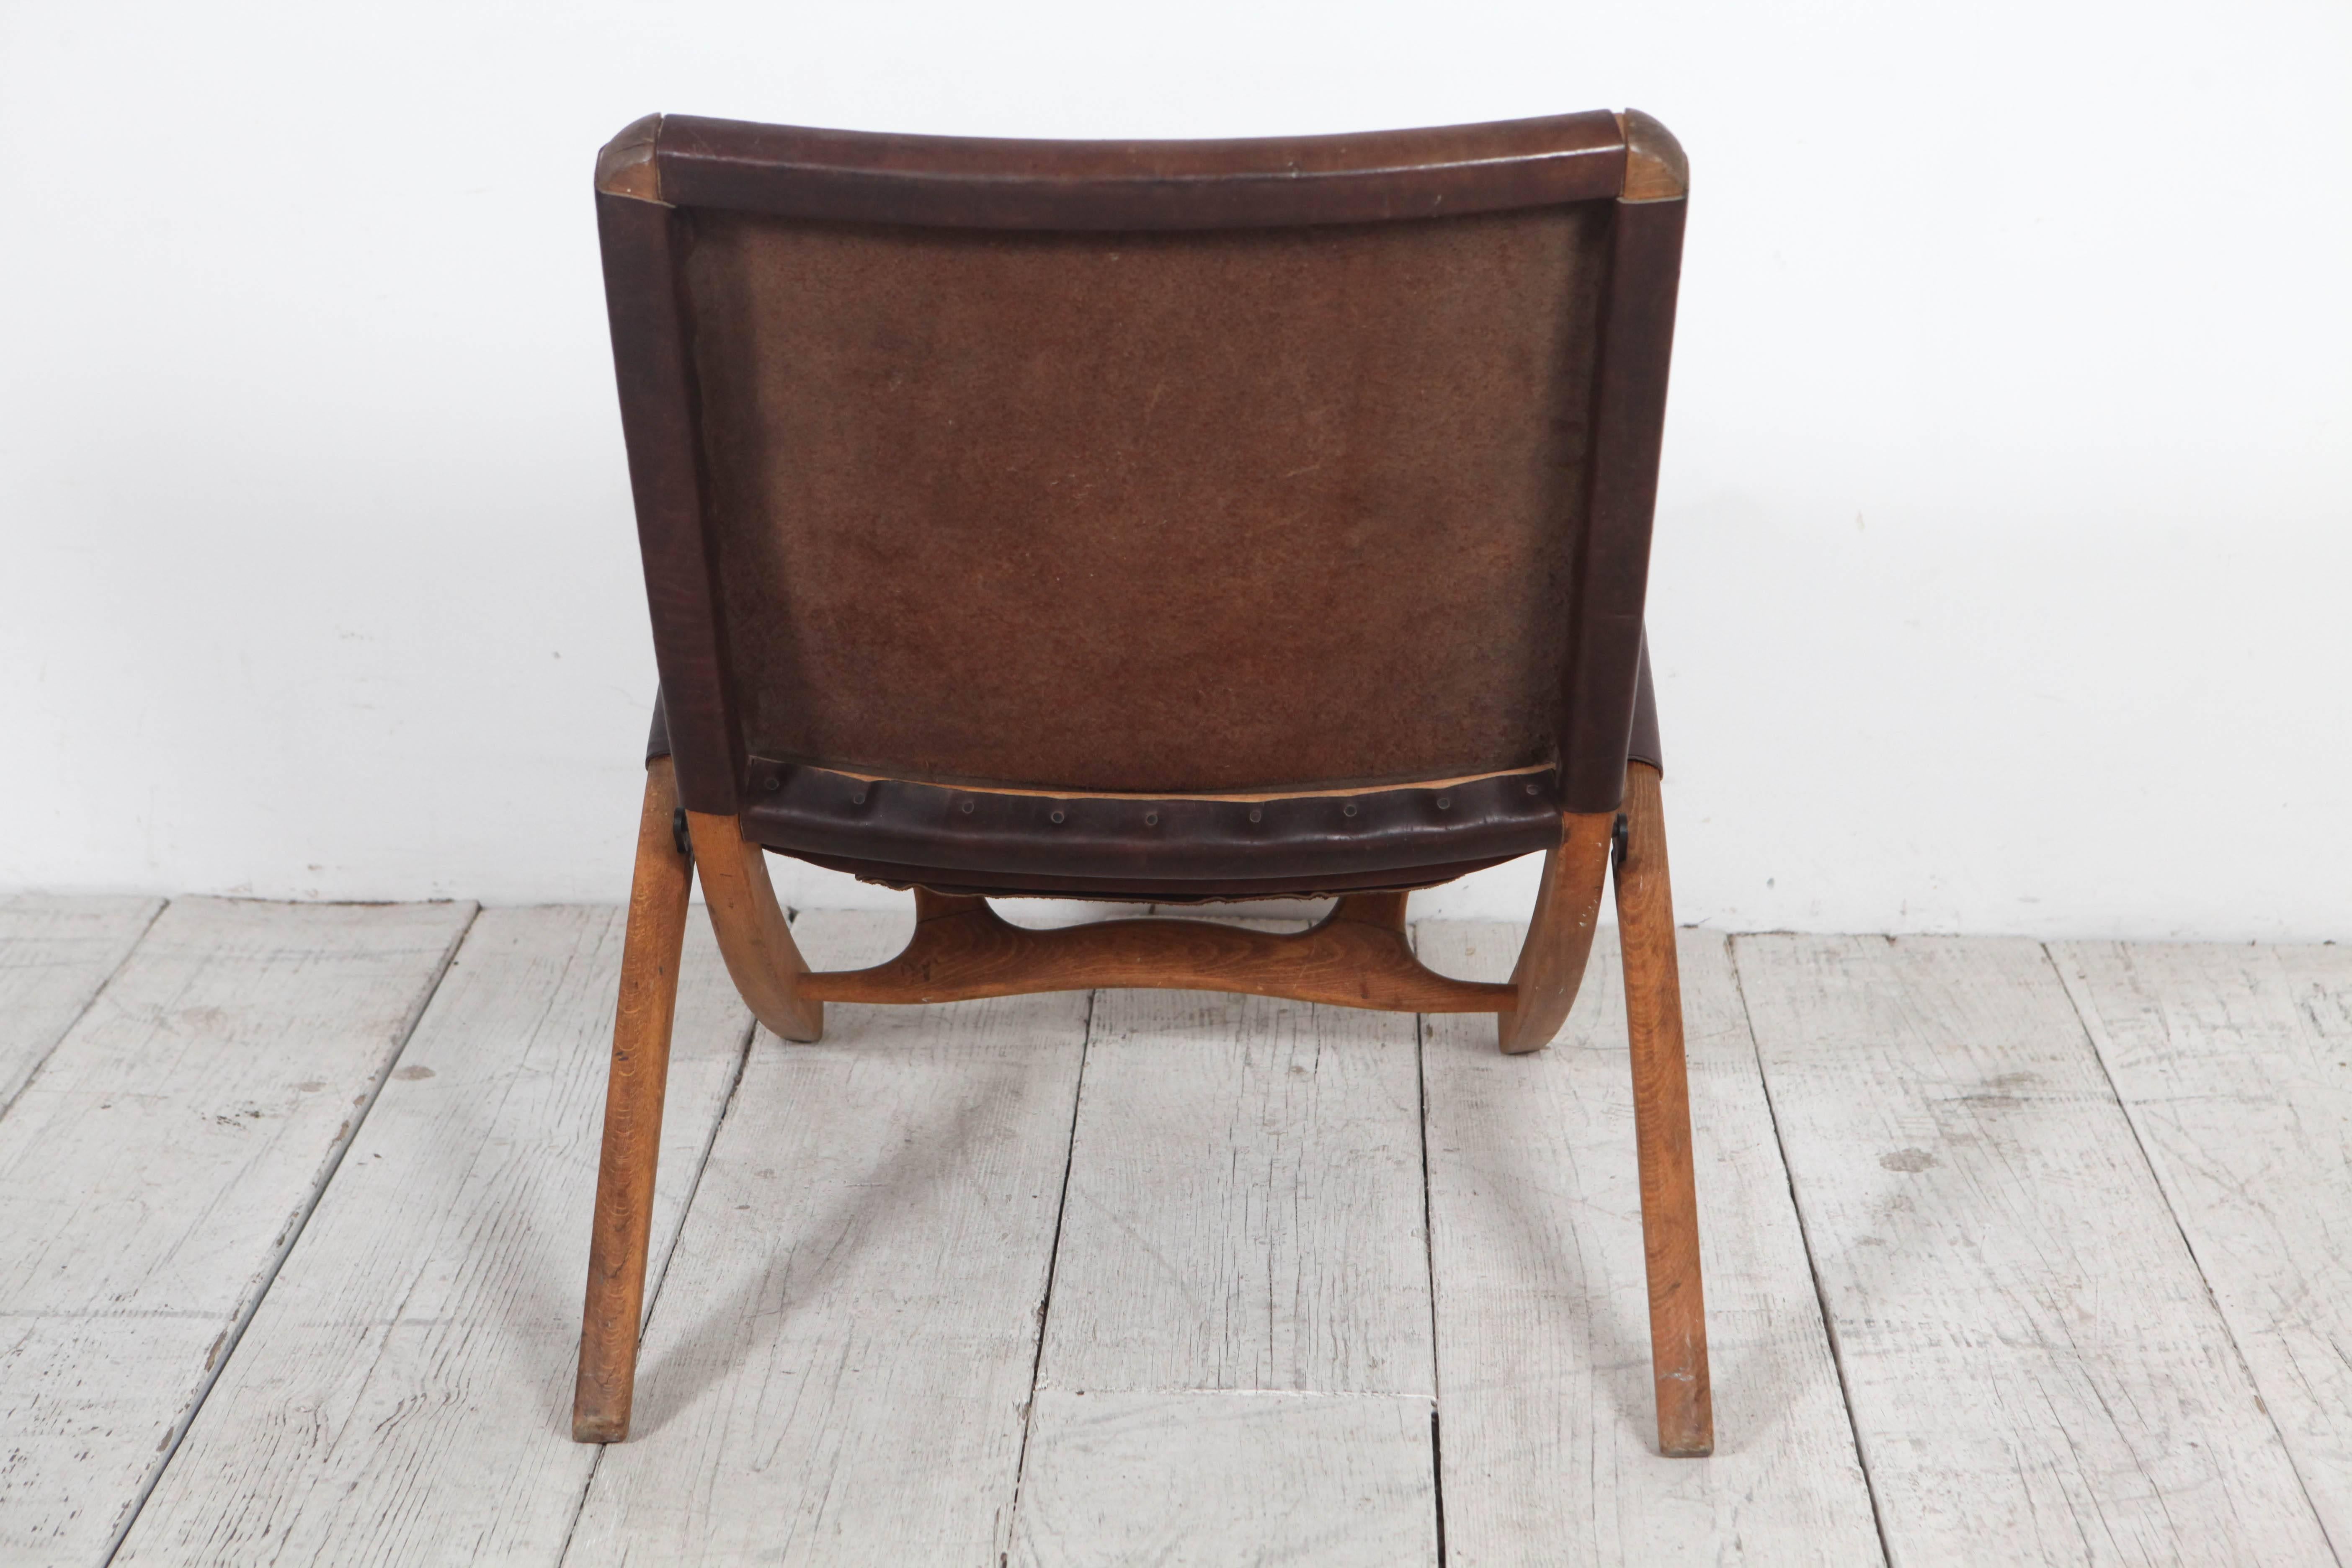 leather folding chair